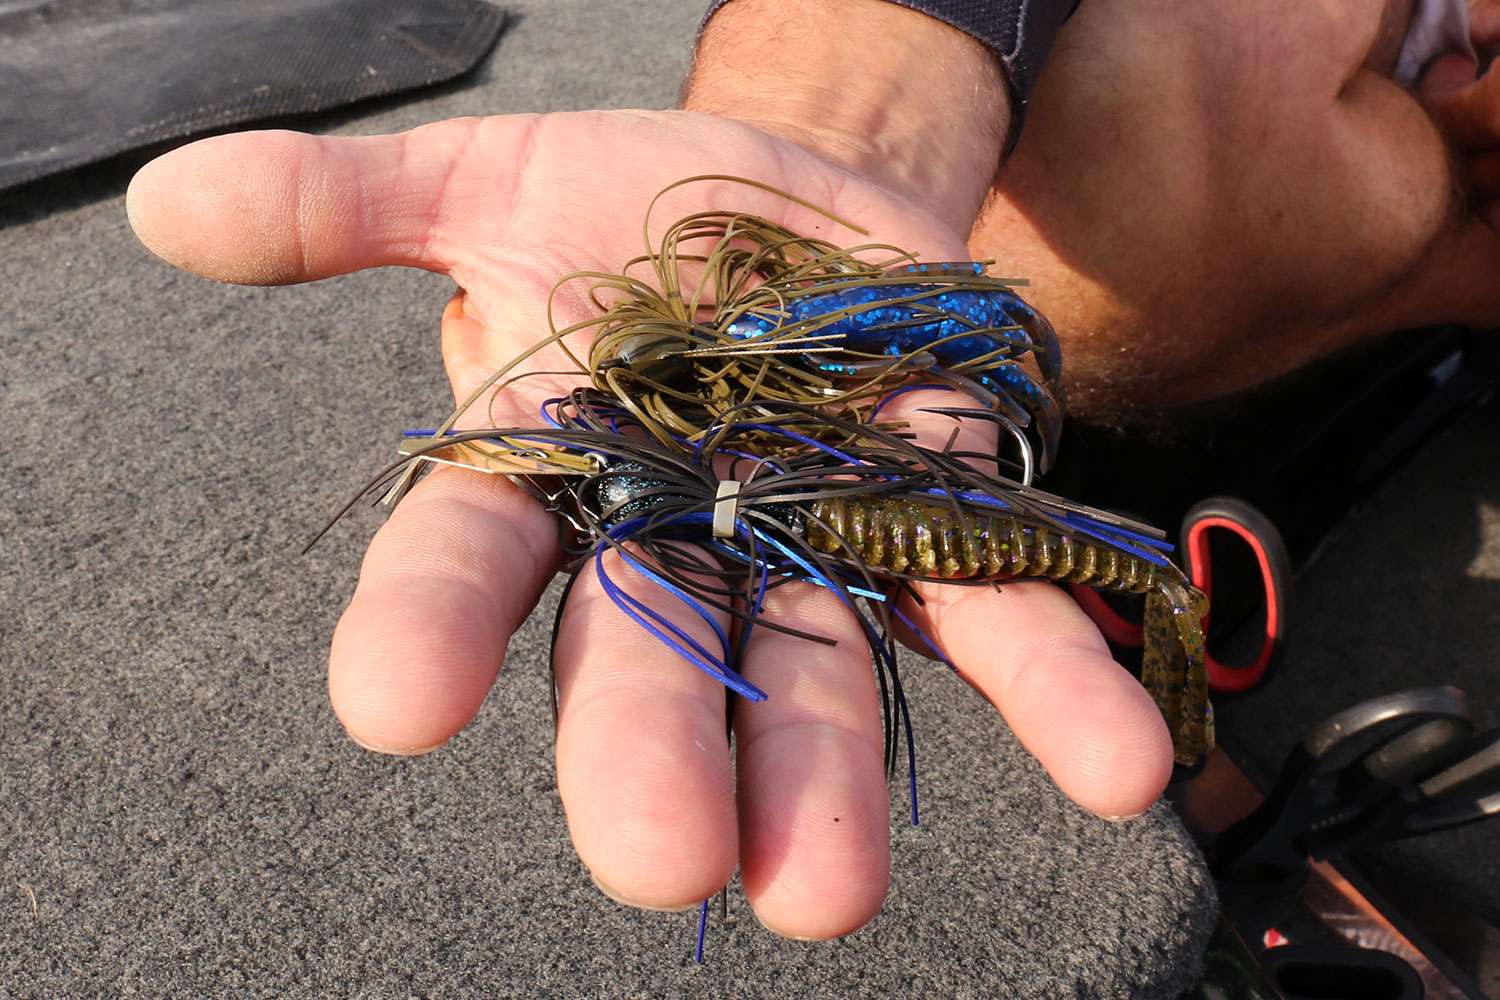 A 1/2-ounce Zorro Jig with a 3.5-inch Zoom Ultra Vibe Speed Craw was a top choice. He also used the soft plastic trailer on a 1/2-ounce vibrating jig. 